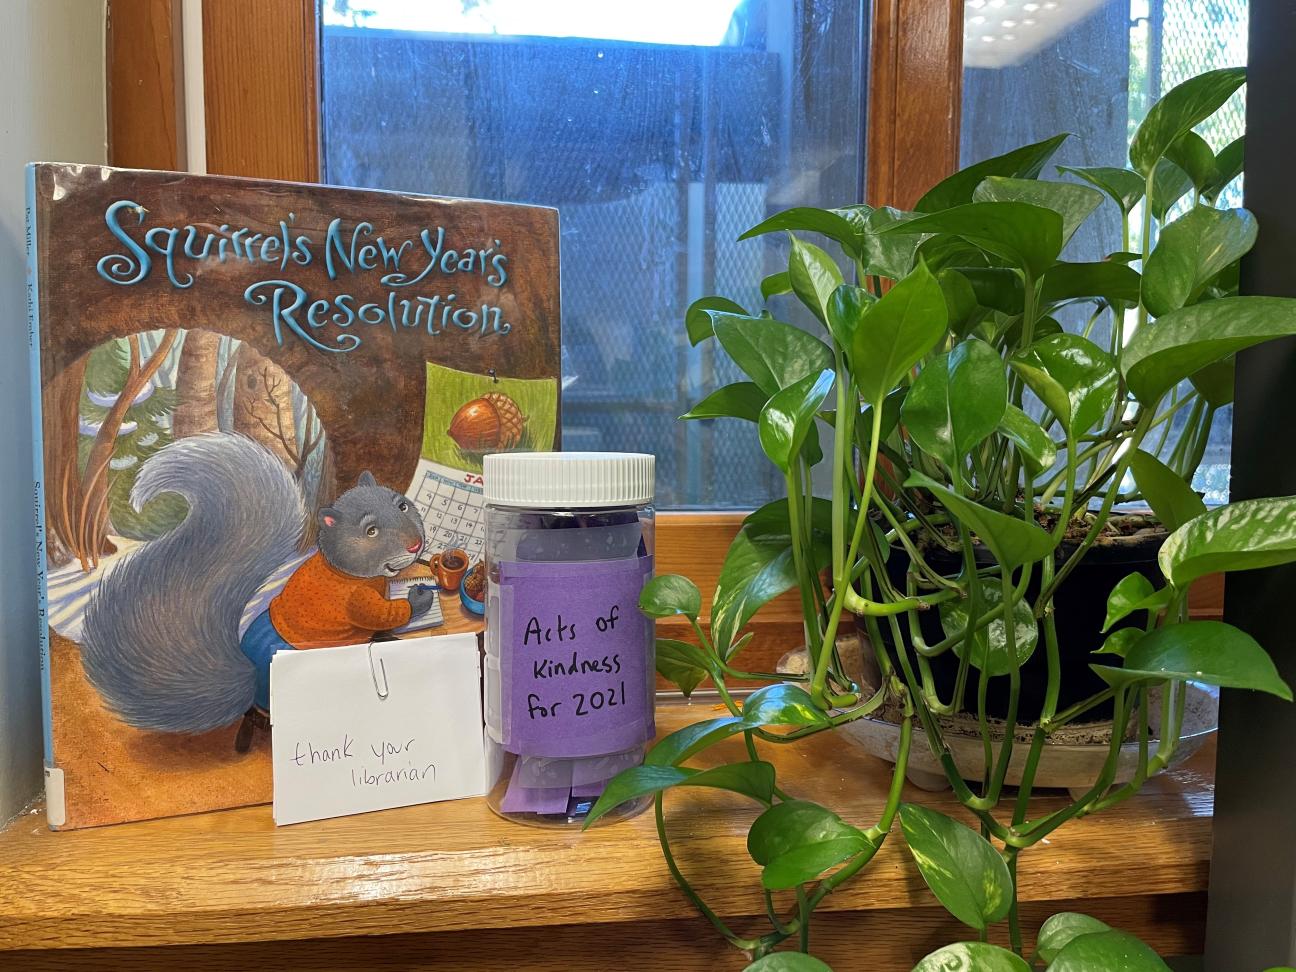 Picture of book "Squirrel's New Year's Resolutions" with jar labeled "Acts of Kindness for 2021" and a plant